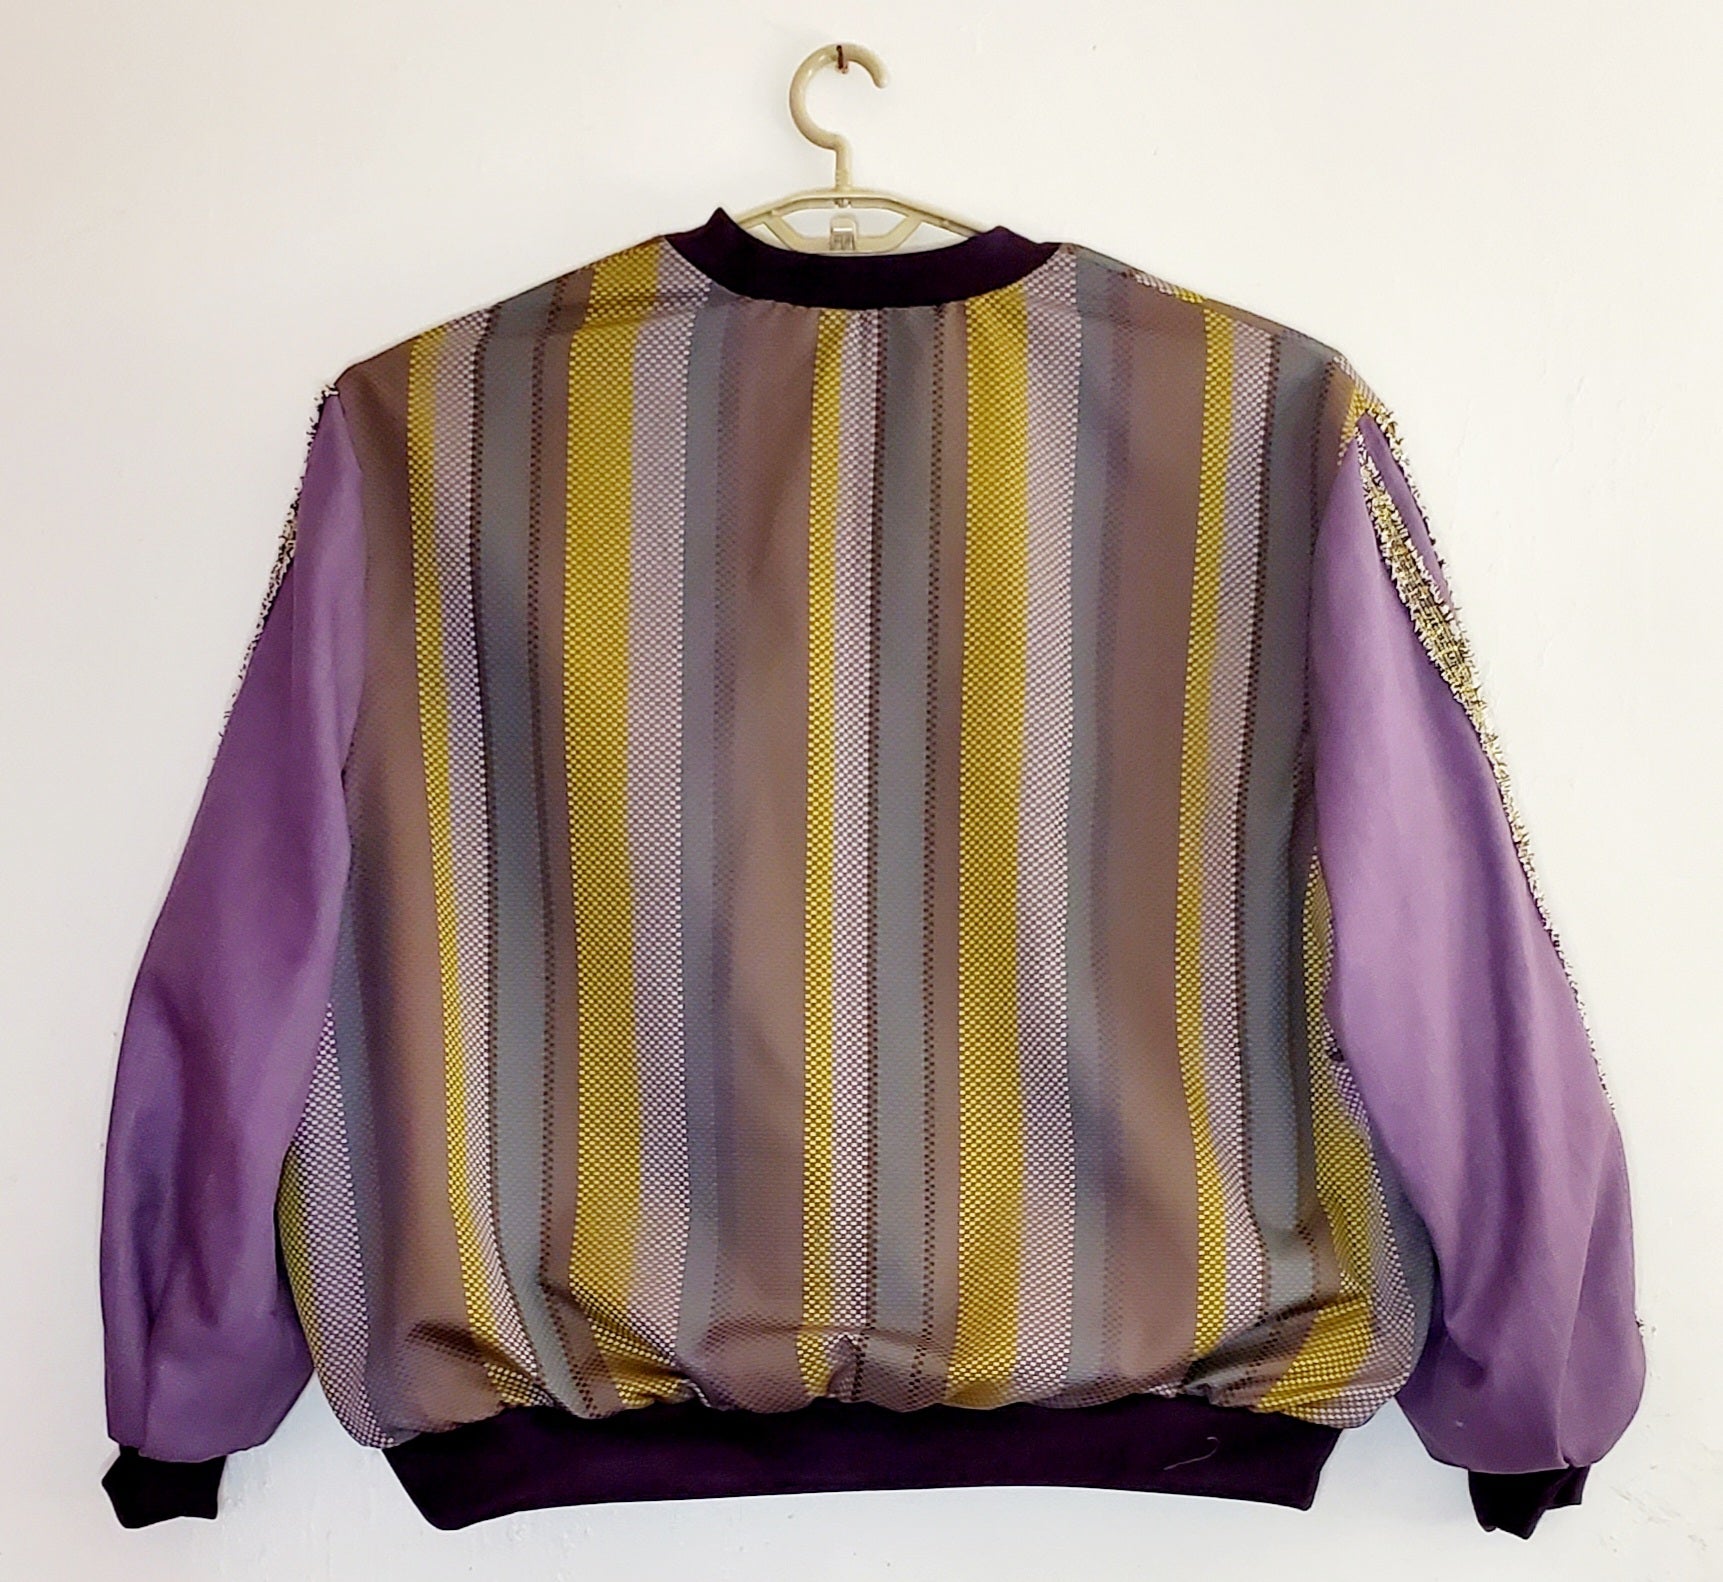 Back view of Purple striped jacquard bomber jacket with racing striped sleeves